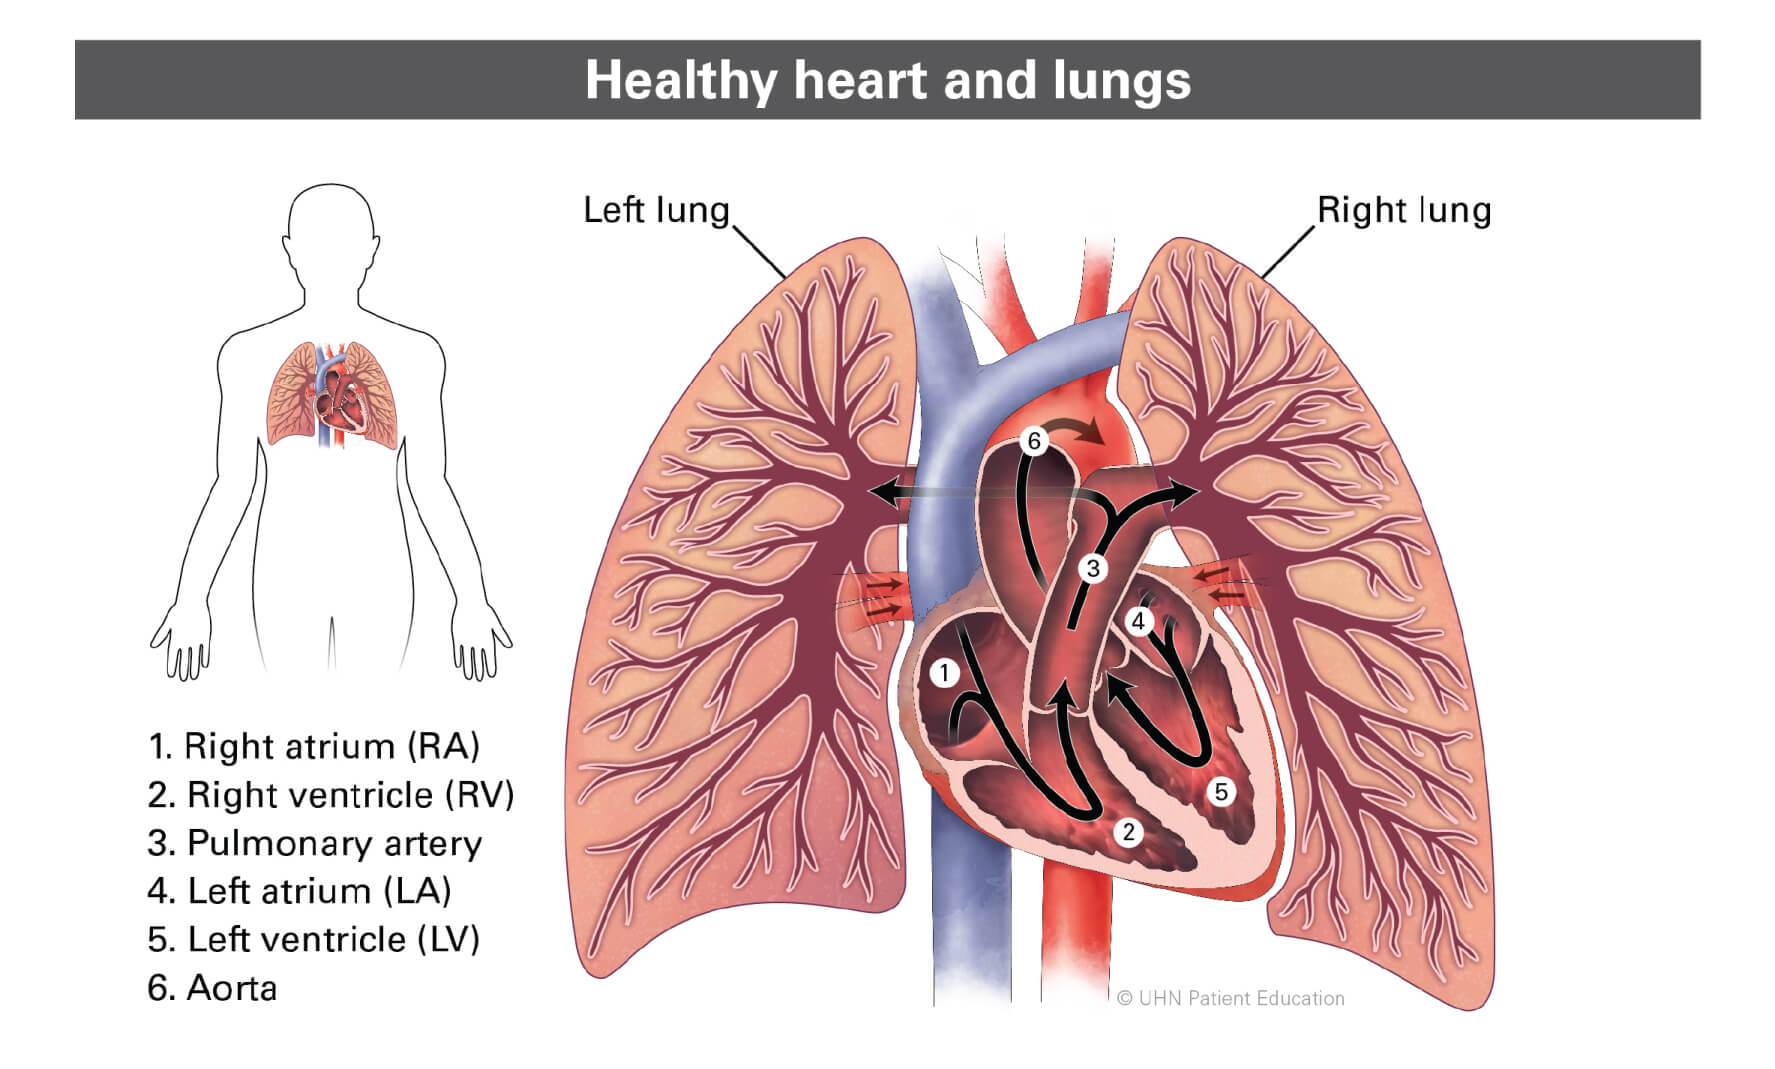 Diagram of heart and lungs pointing to each part; right and left lungs, Right Atrium, Left Atrium, Right Ventricle, and Left Ventricle